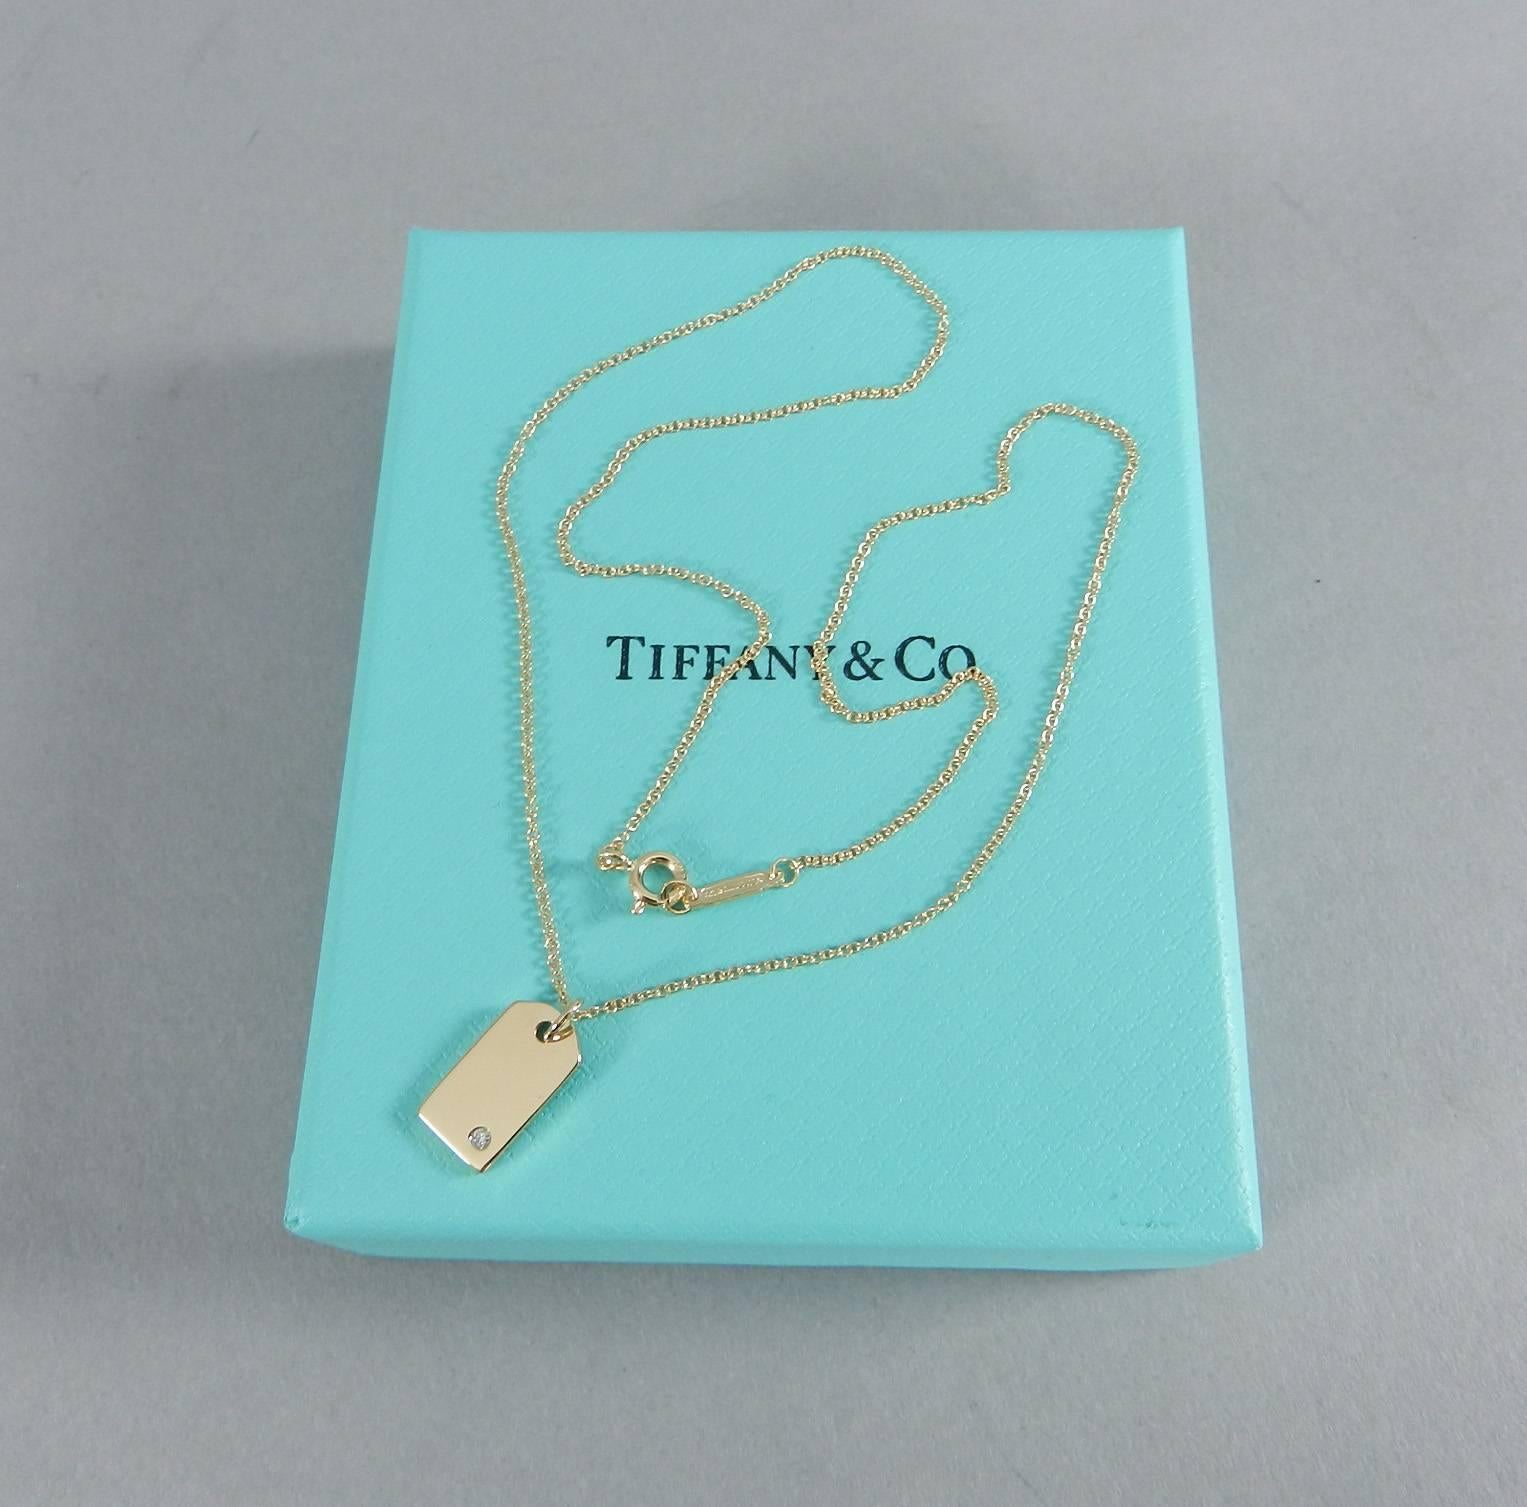 Tiffany and Co 18k Yellow Gold Mini Tag Charm Diamond Pendant Necklace.  Brand new without tags. Received as a gift and unworn.  Includes box, pouch, presentation card. Necklace chain is 16